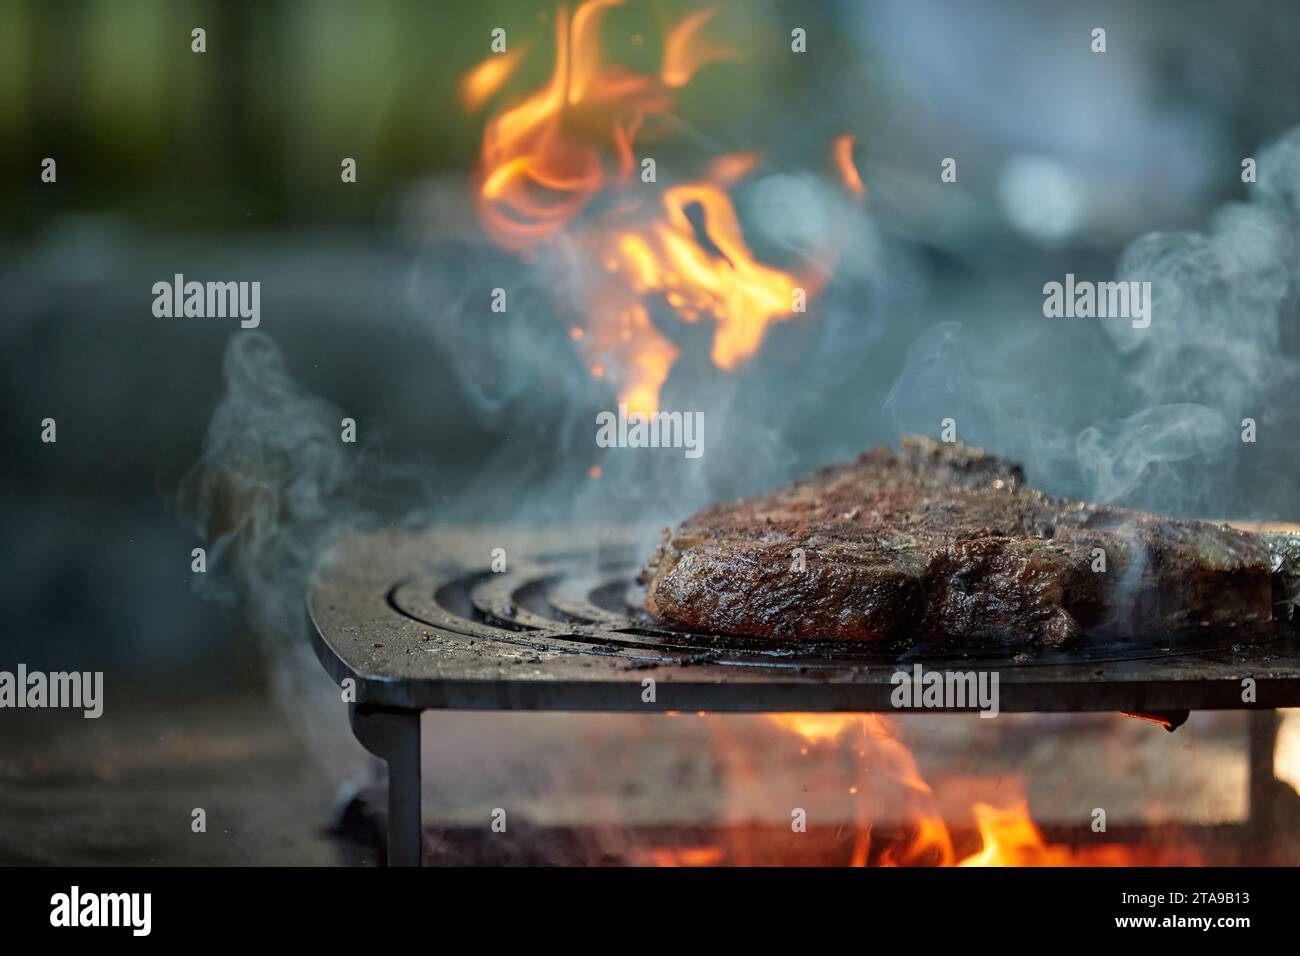 Close up of steaks preparing at garden festival, flames, shallow depth of field, very colorful blurred background, evening at garden festival. Stock Photo